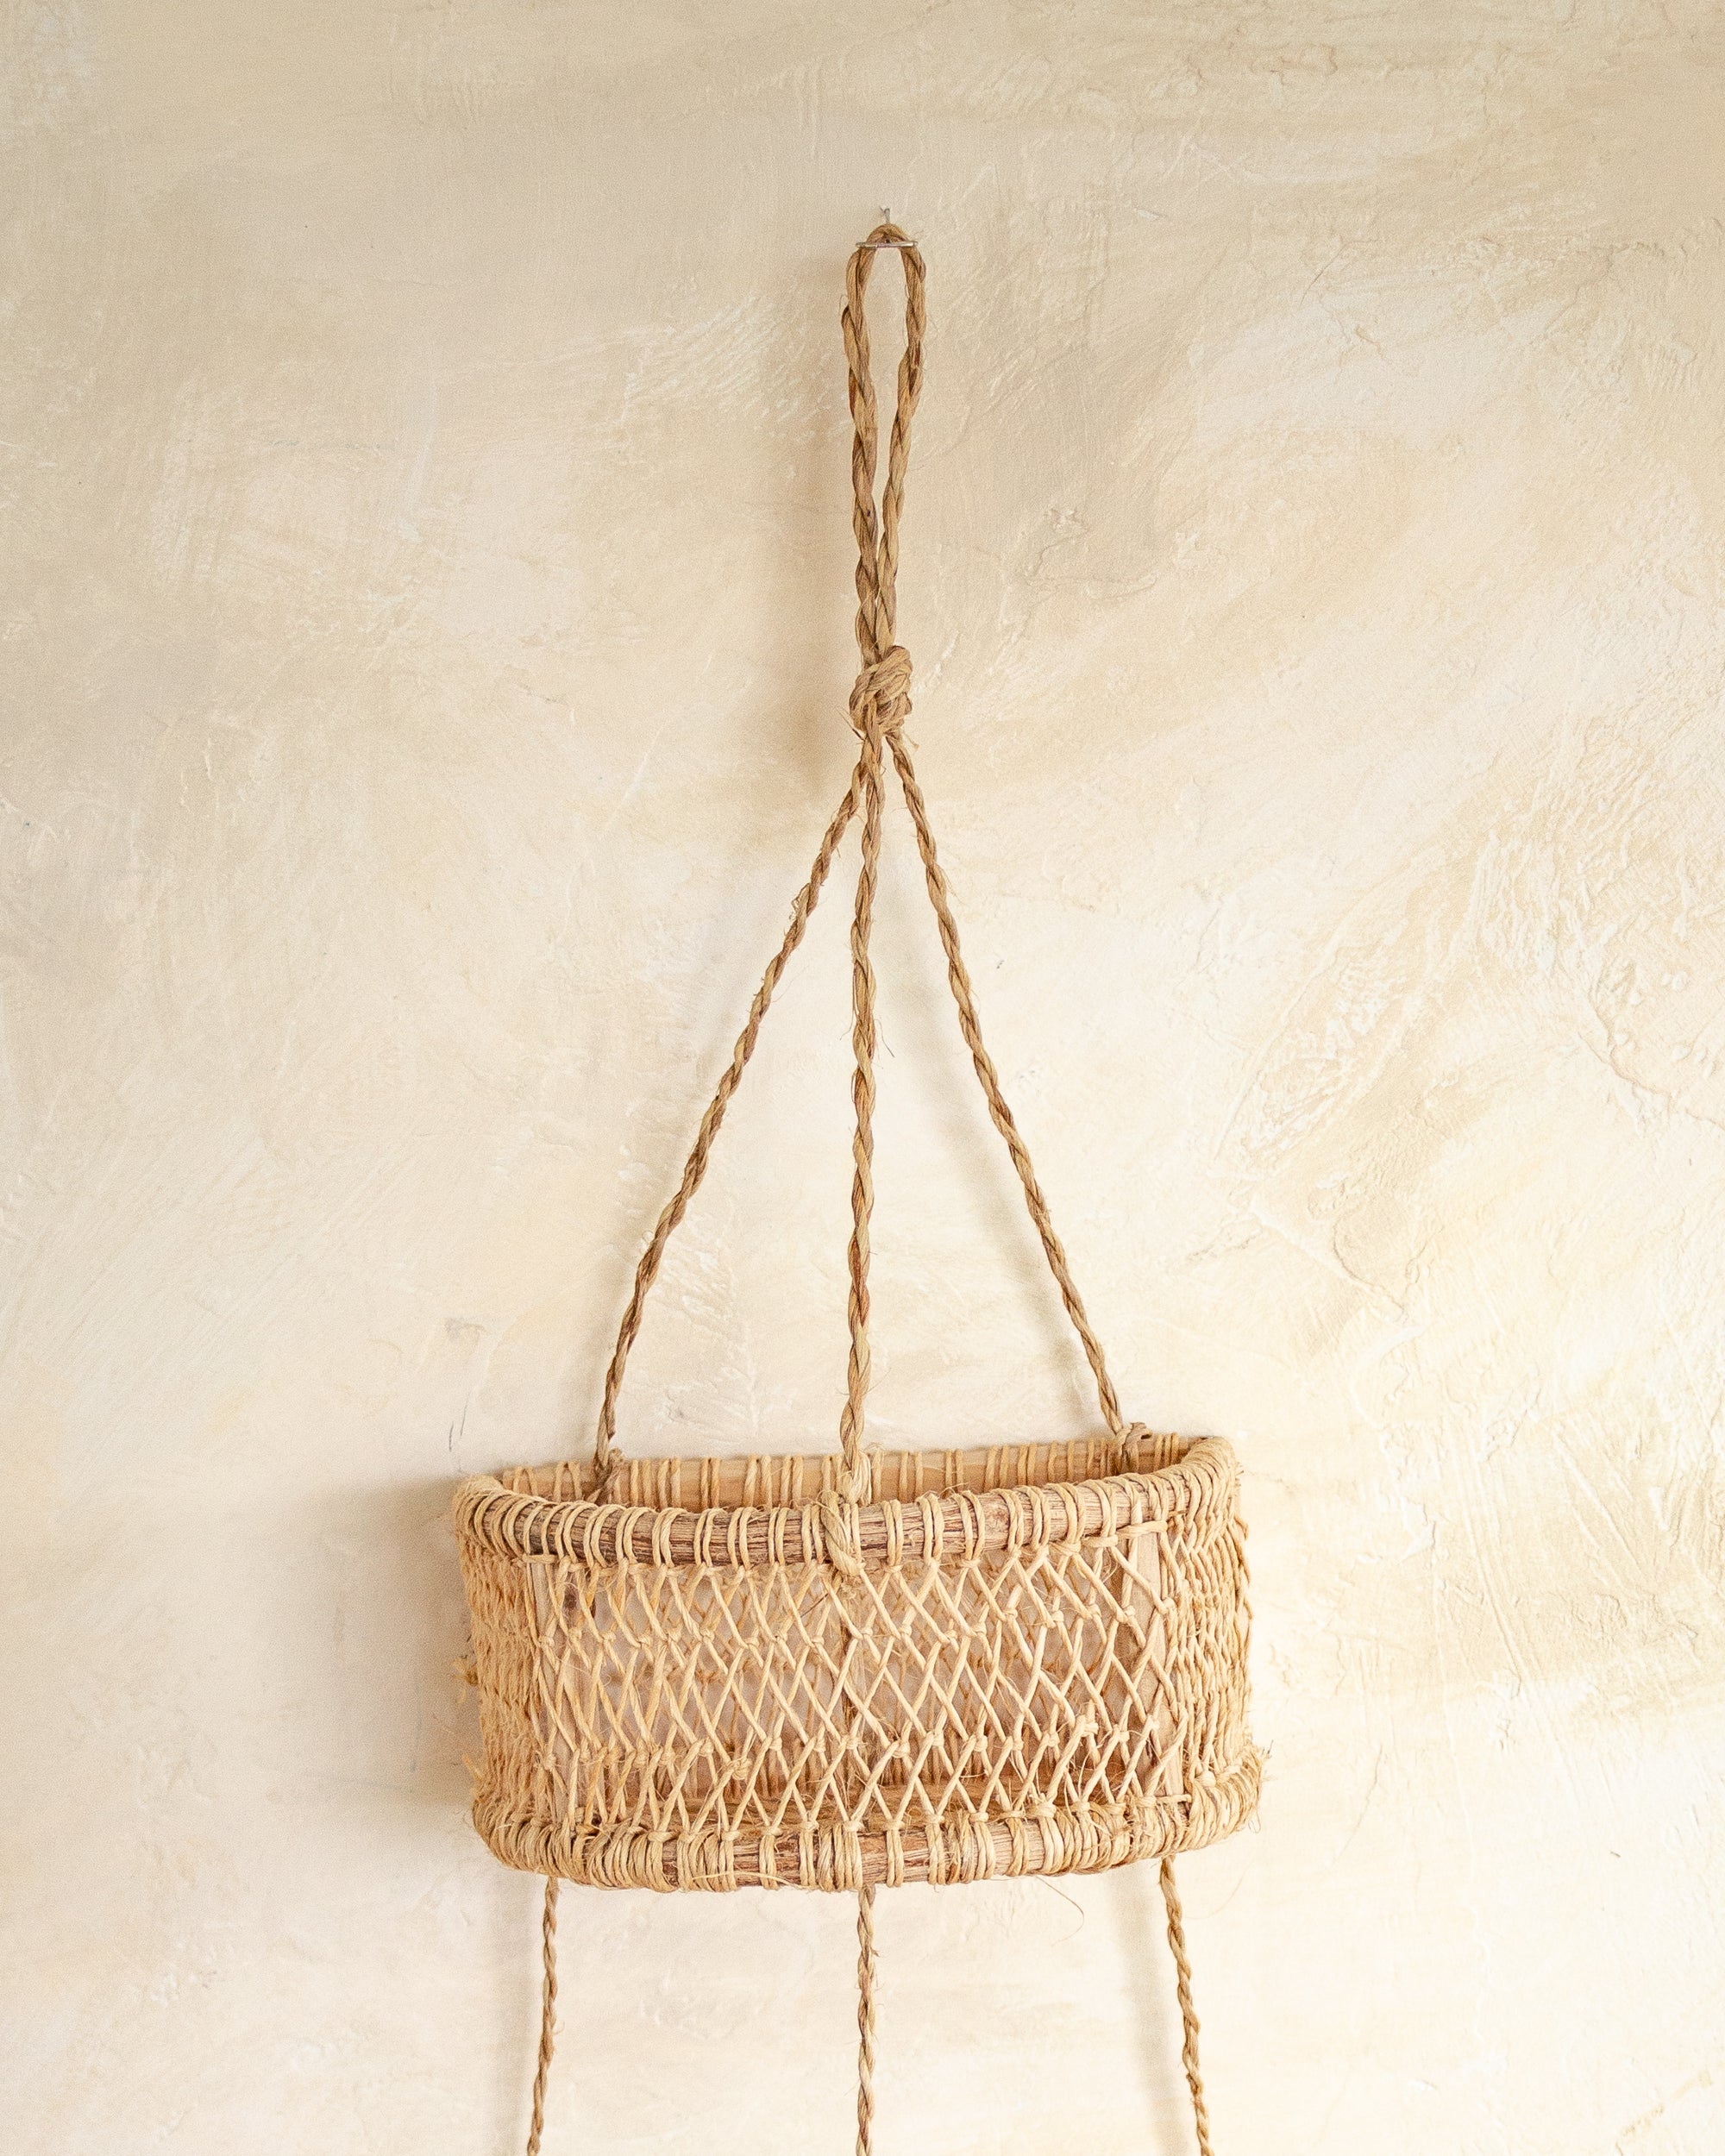 Copper and Jute Rope 3 Tier Hanging Basket by World Market